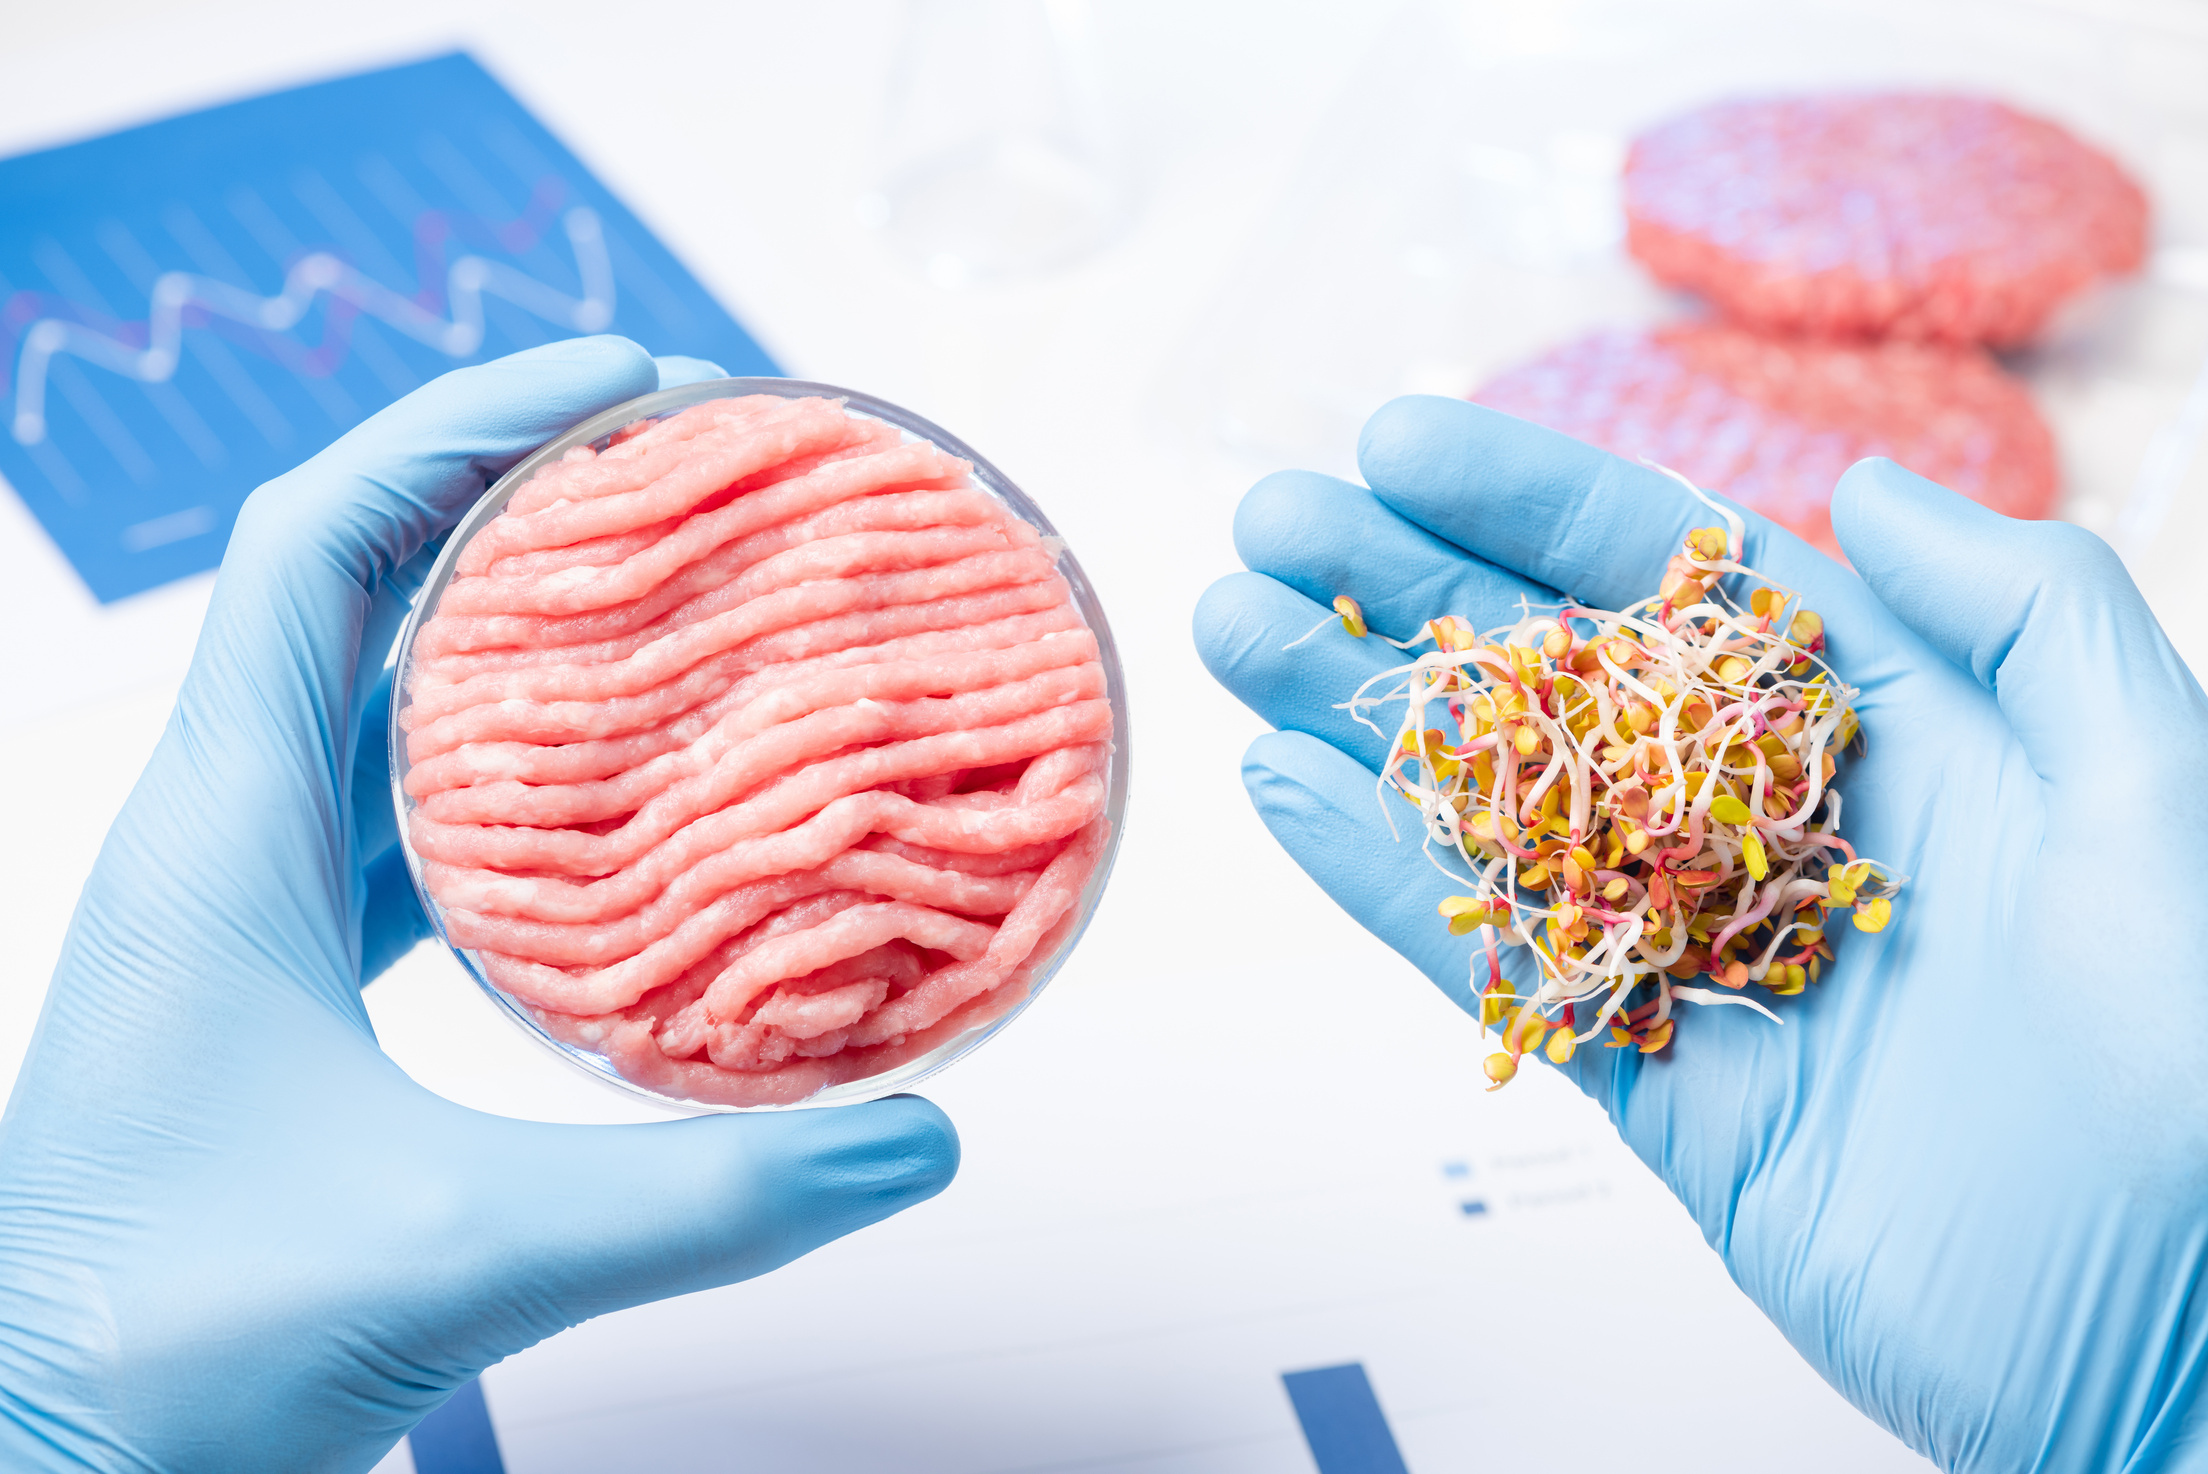 Lab scientist show plant material for animal meat substitute